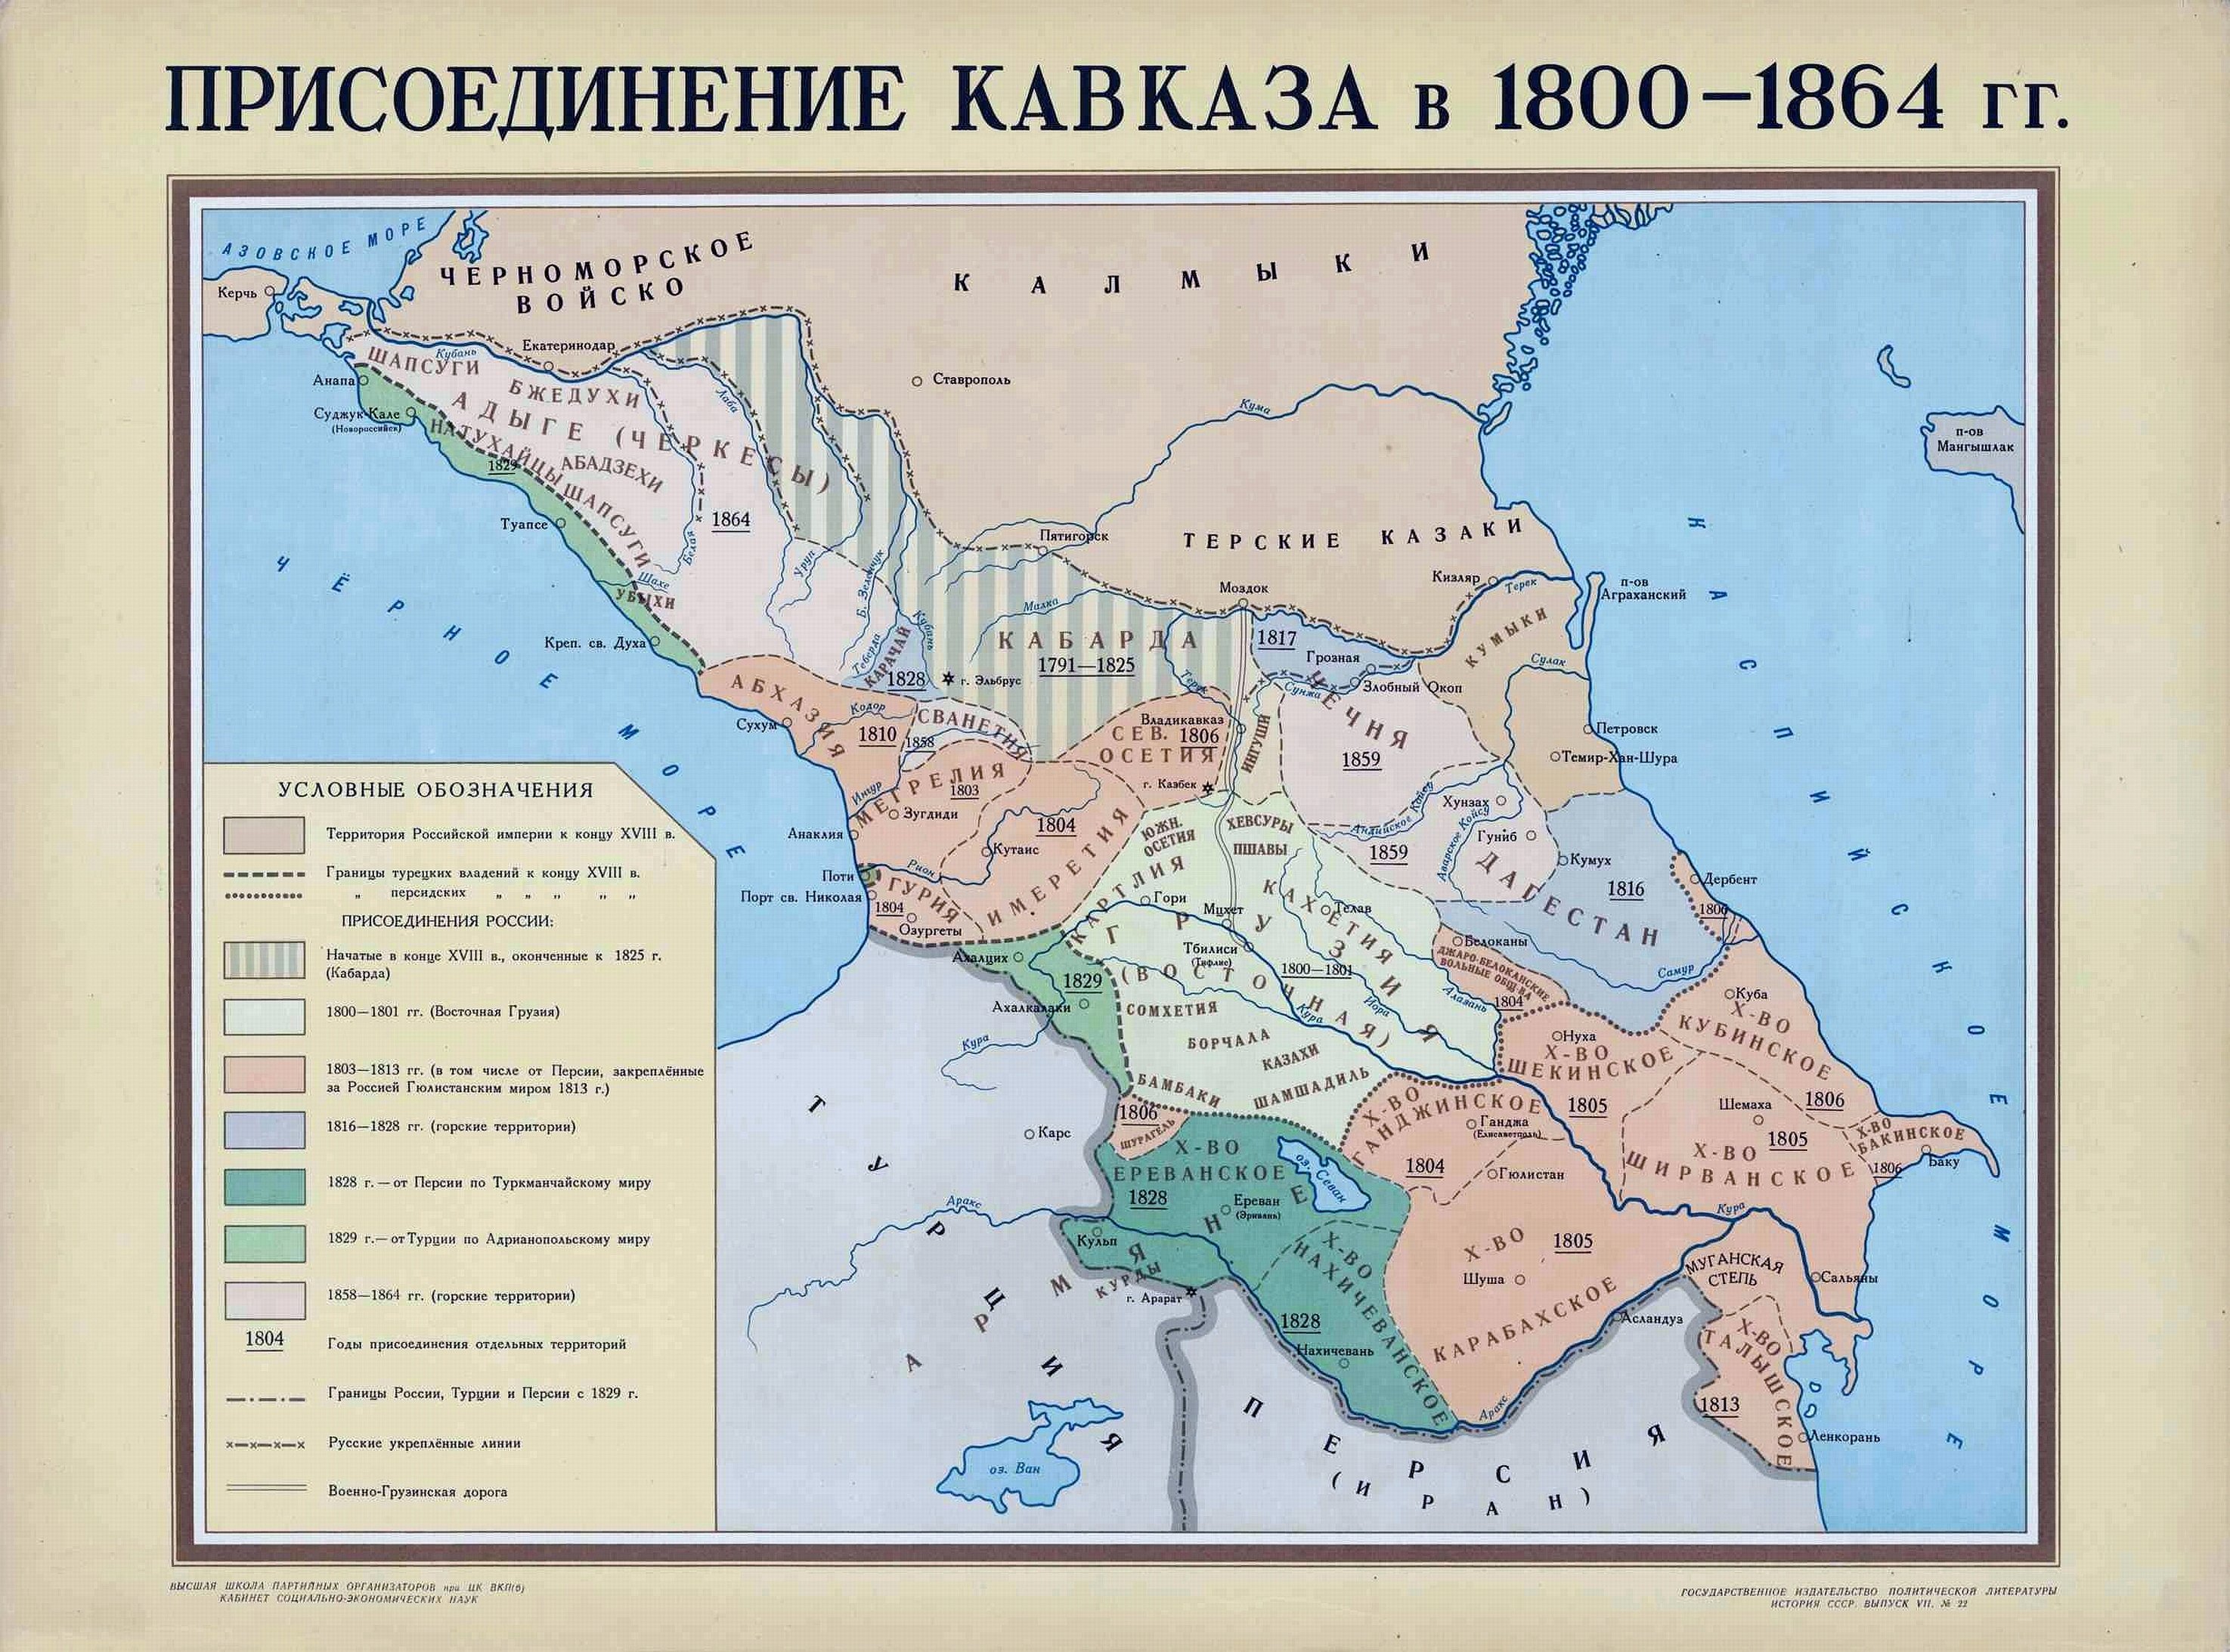 Annexation of the Caucasus 1800 - 1864. "History of the USSR. Vol. 7. The Russian Empire in the First Half of the 19th Century." (Moscow, 1947).